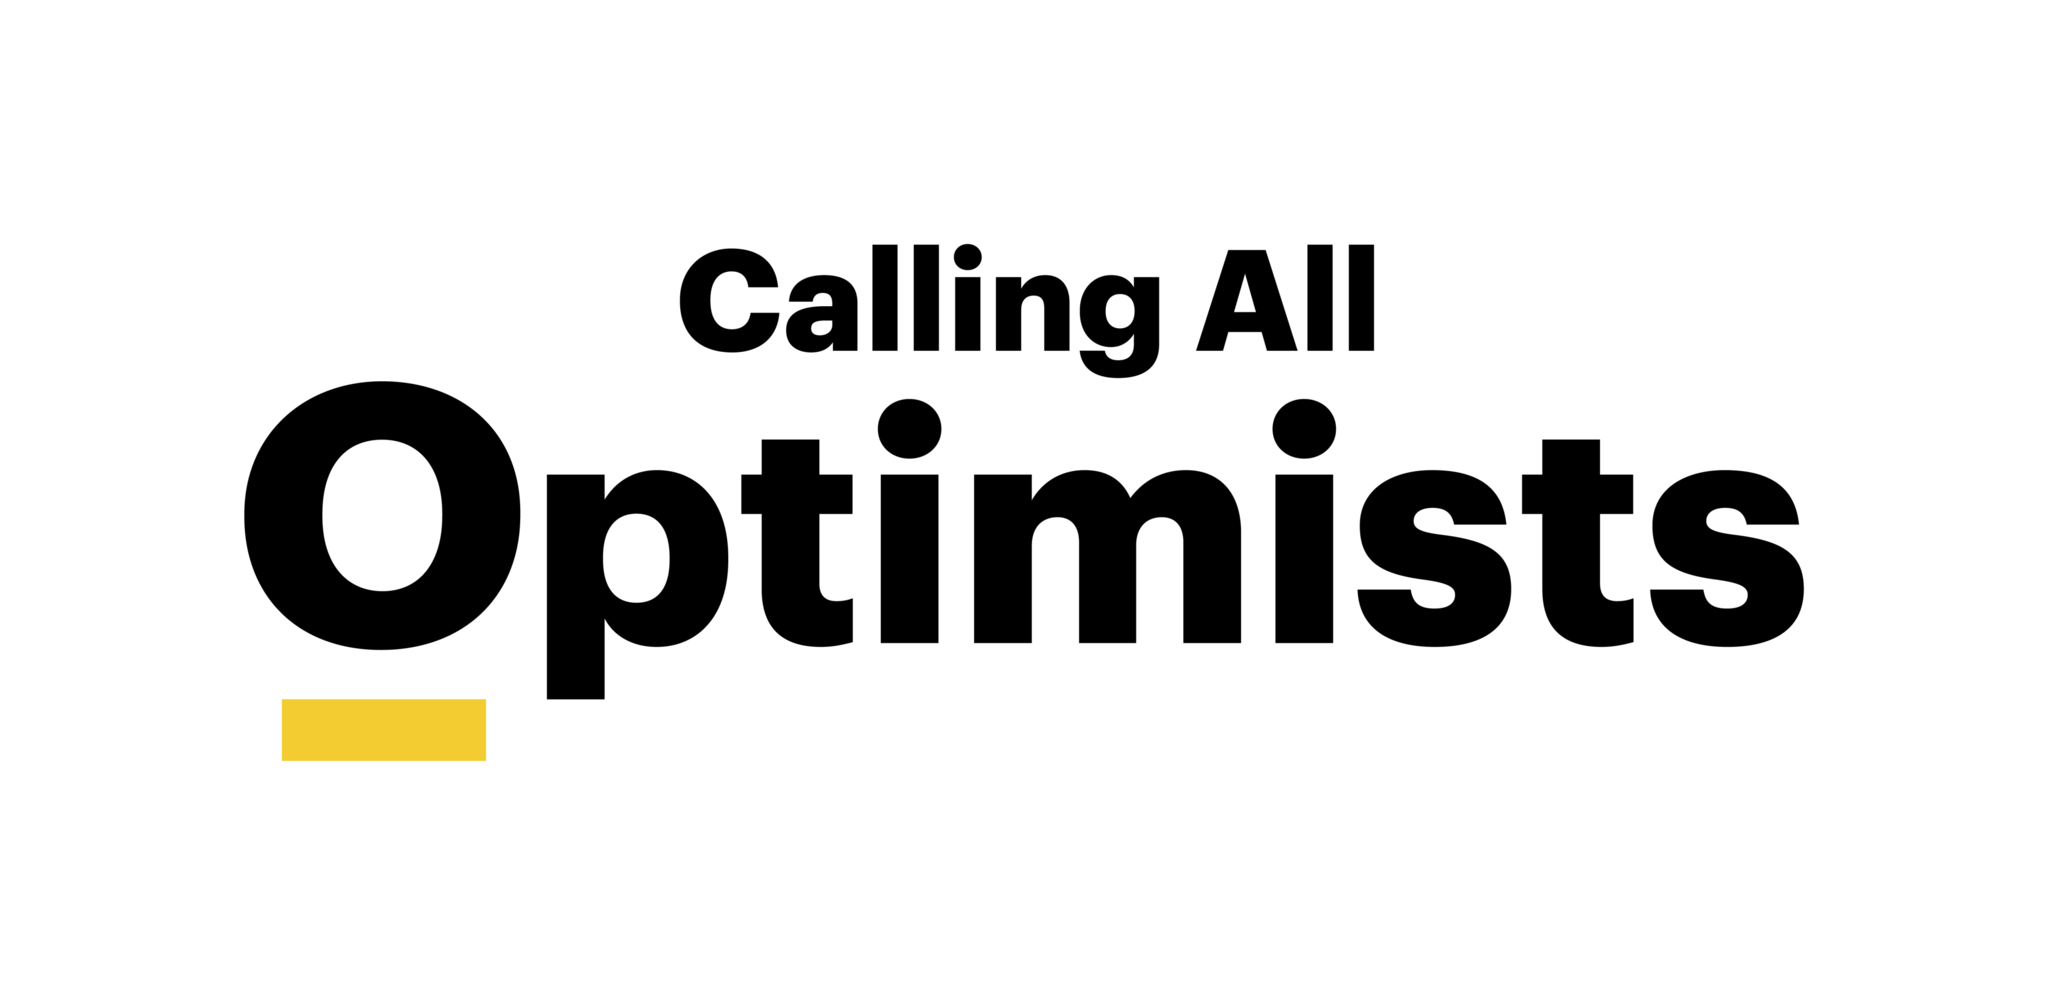 Calling all optimists logo black and yellow